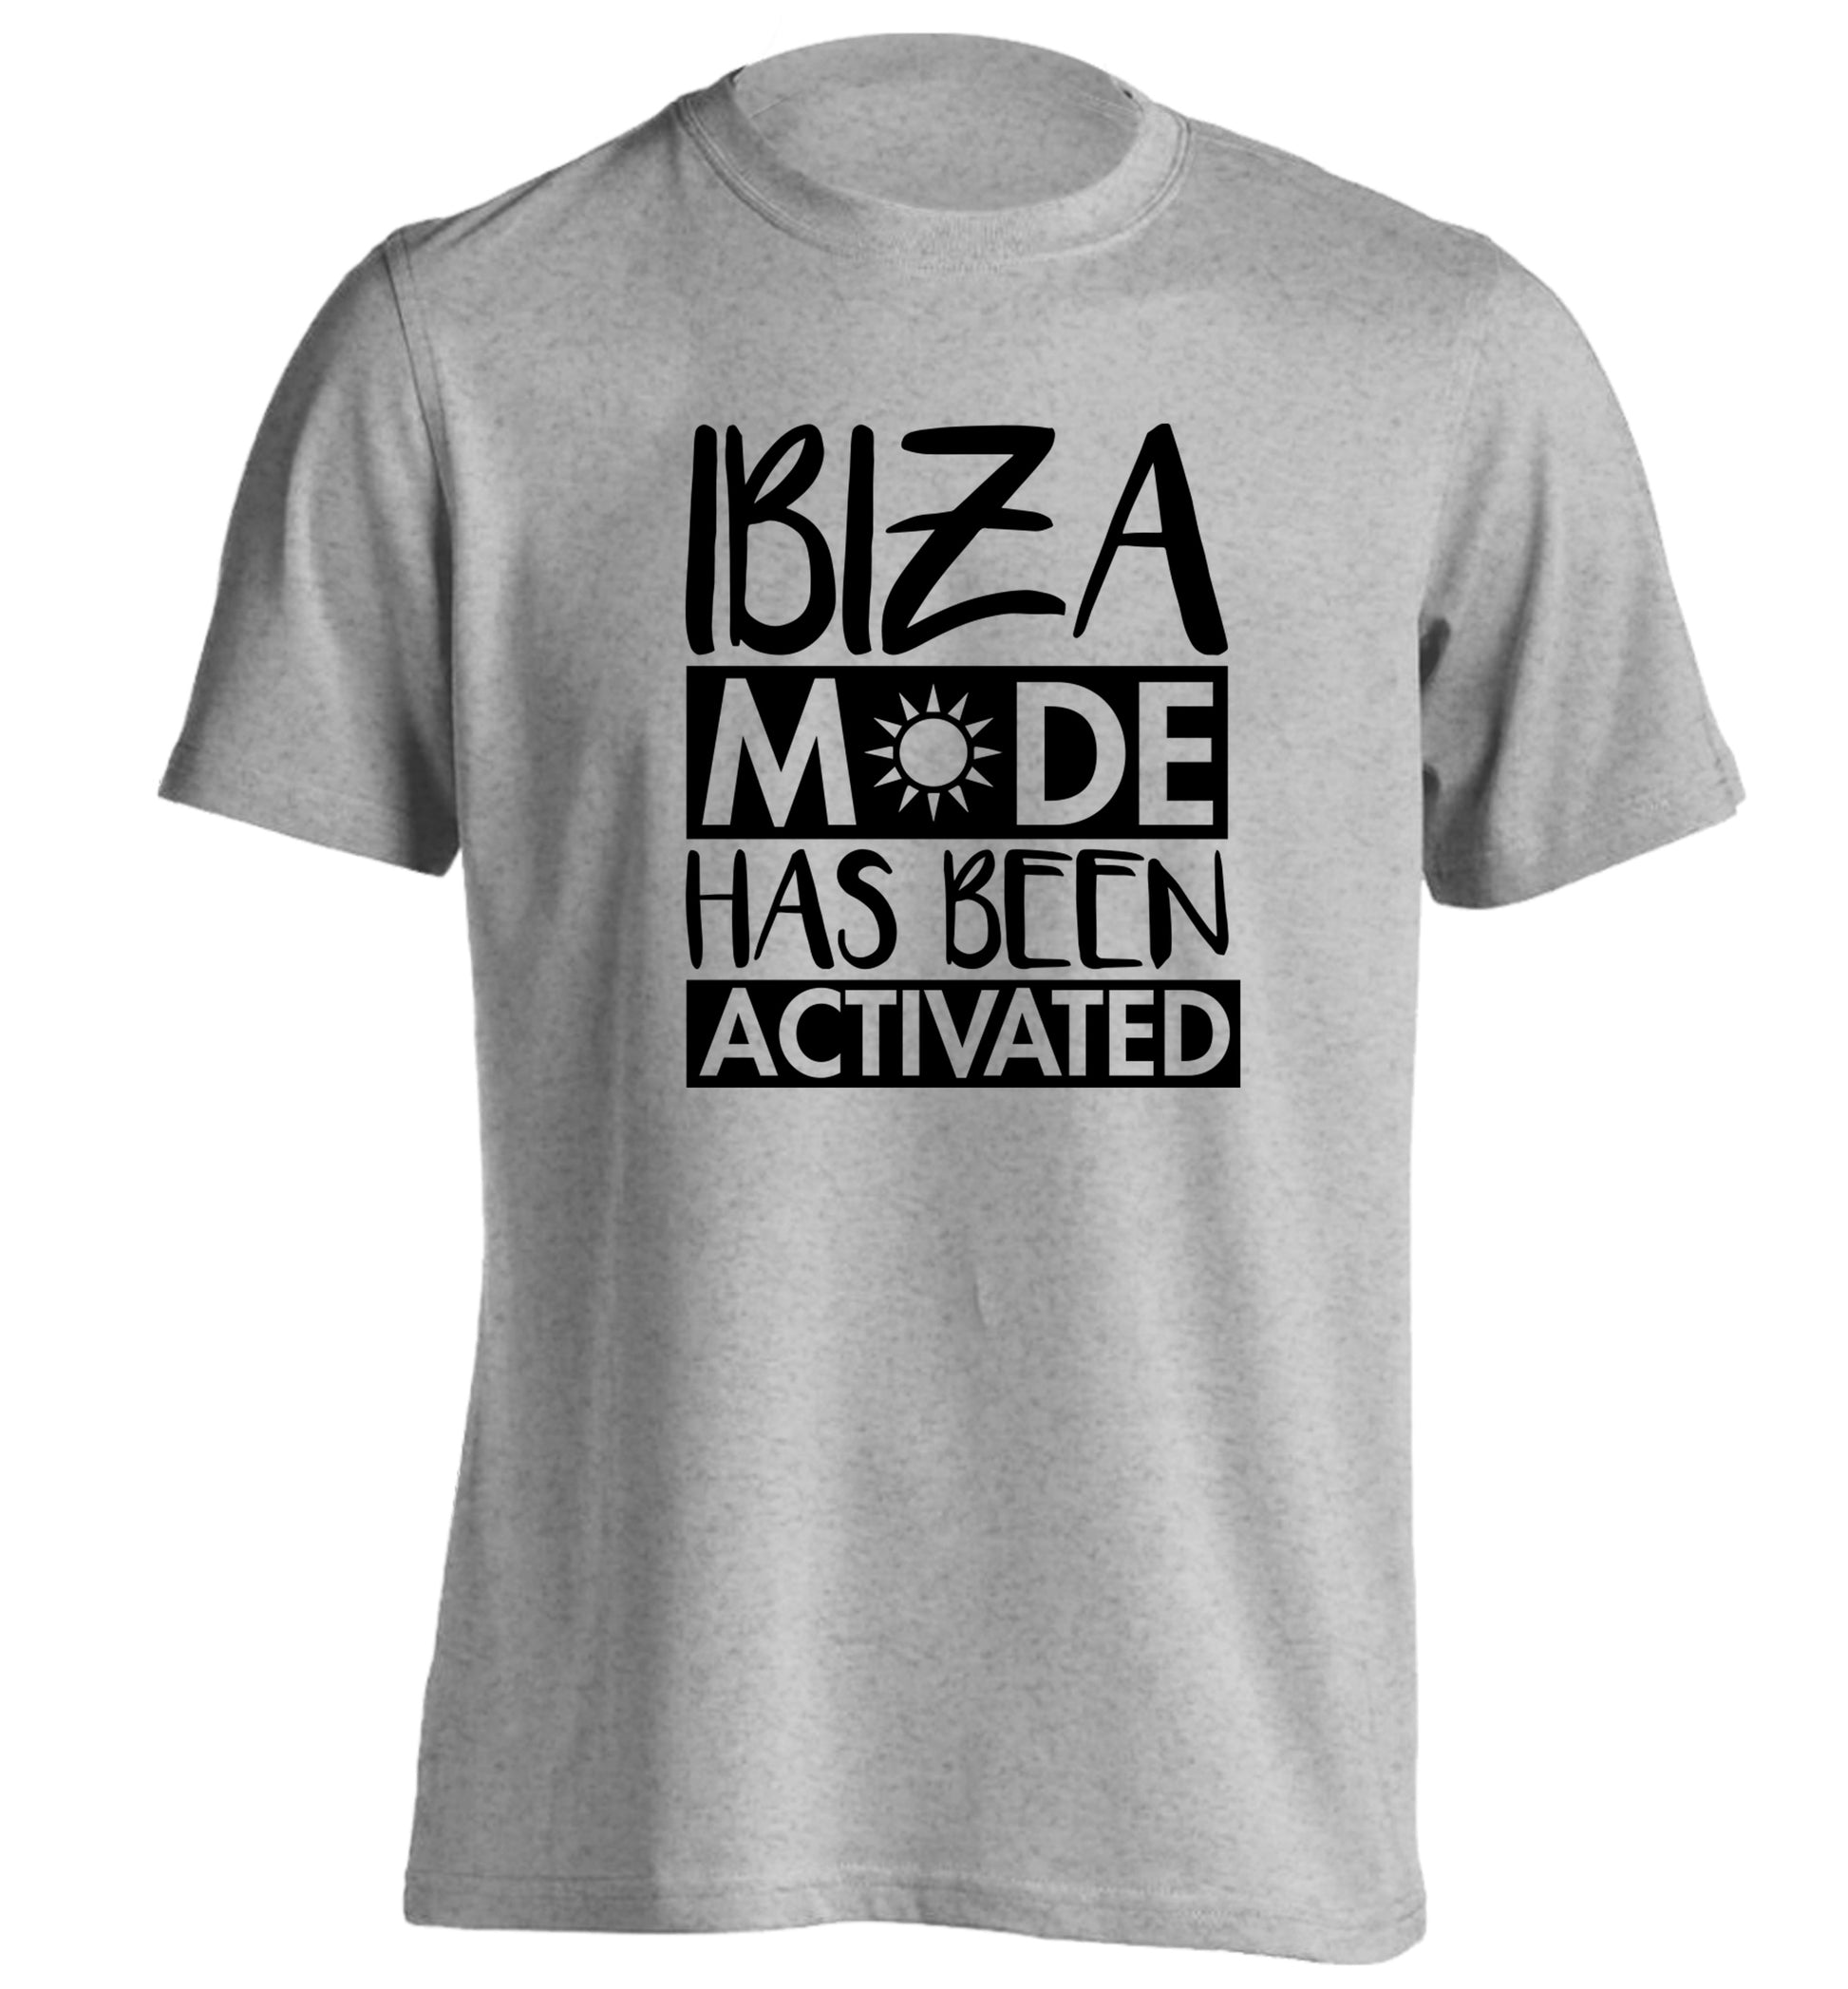 Ibiza mode has been activated adults unisex grey Tshirt 2XL